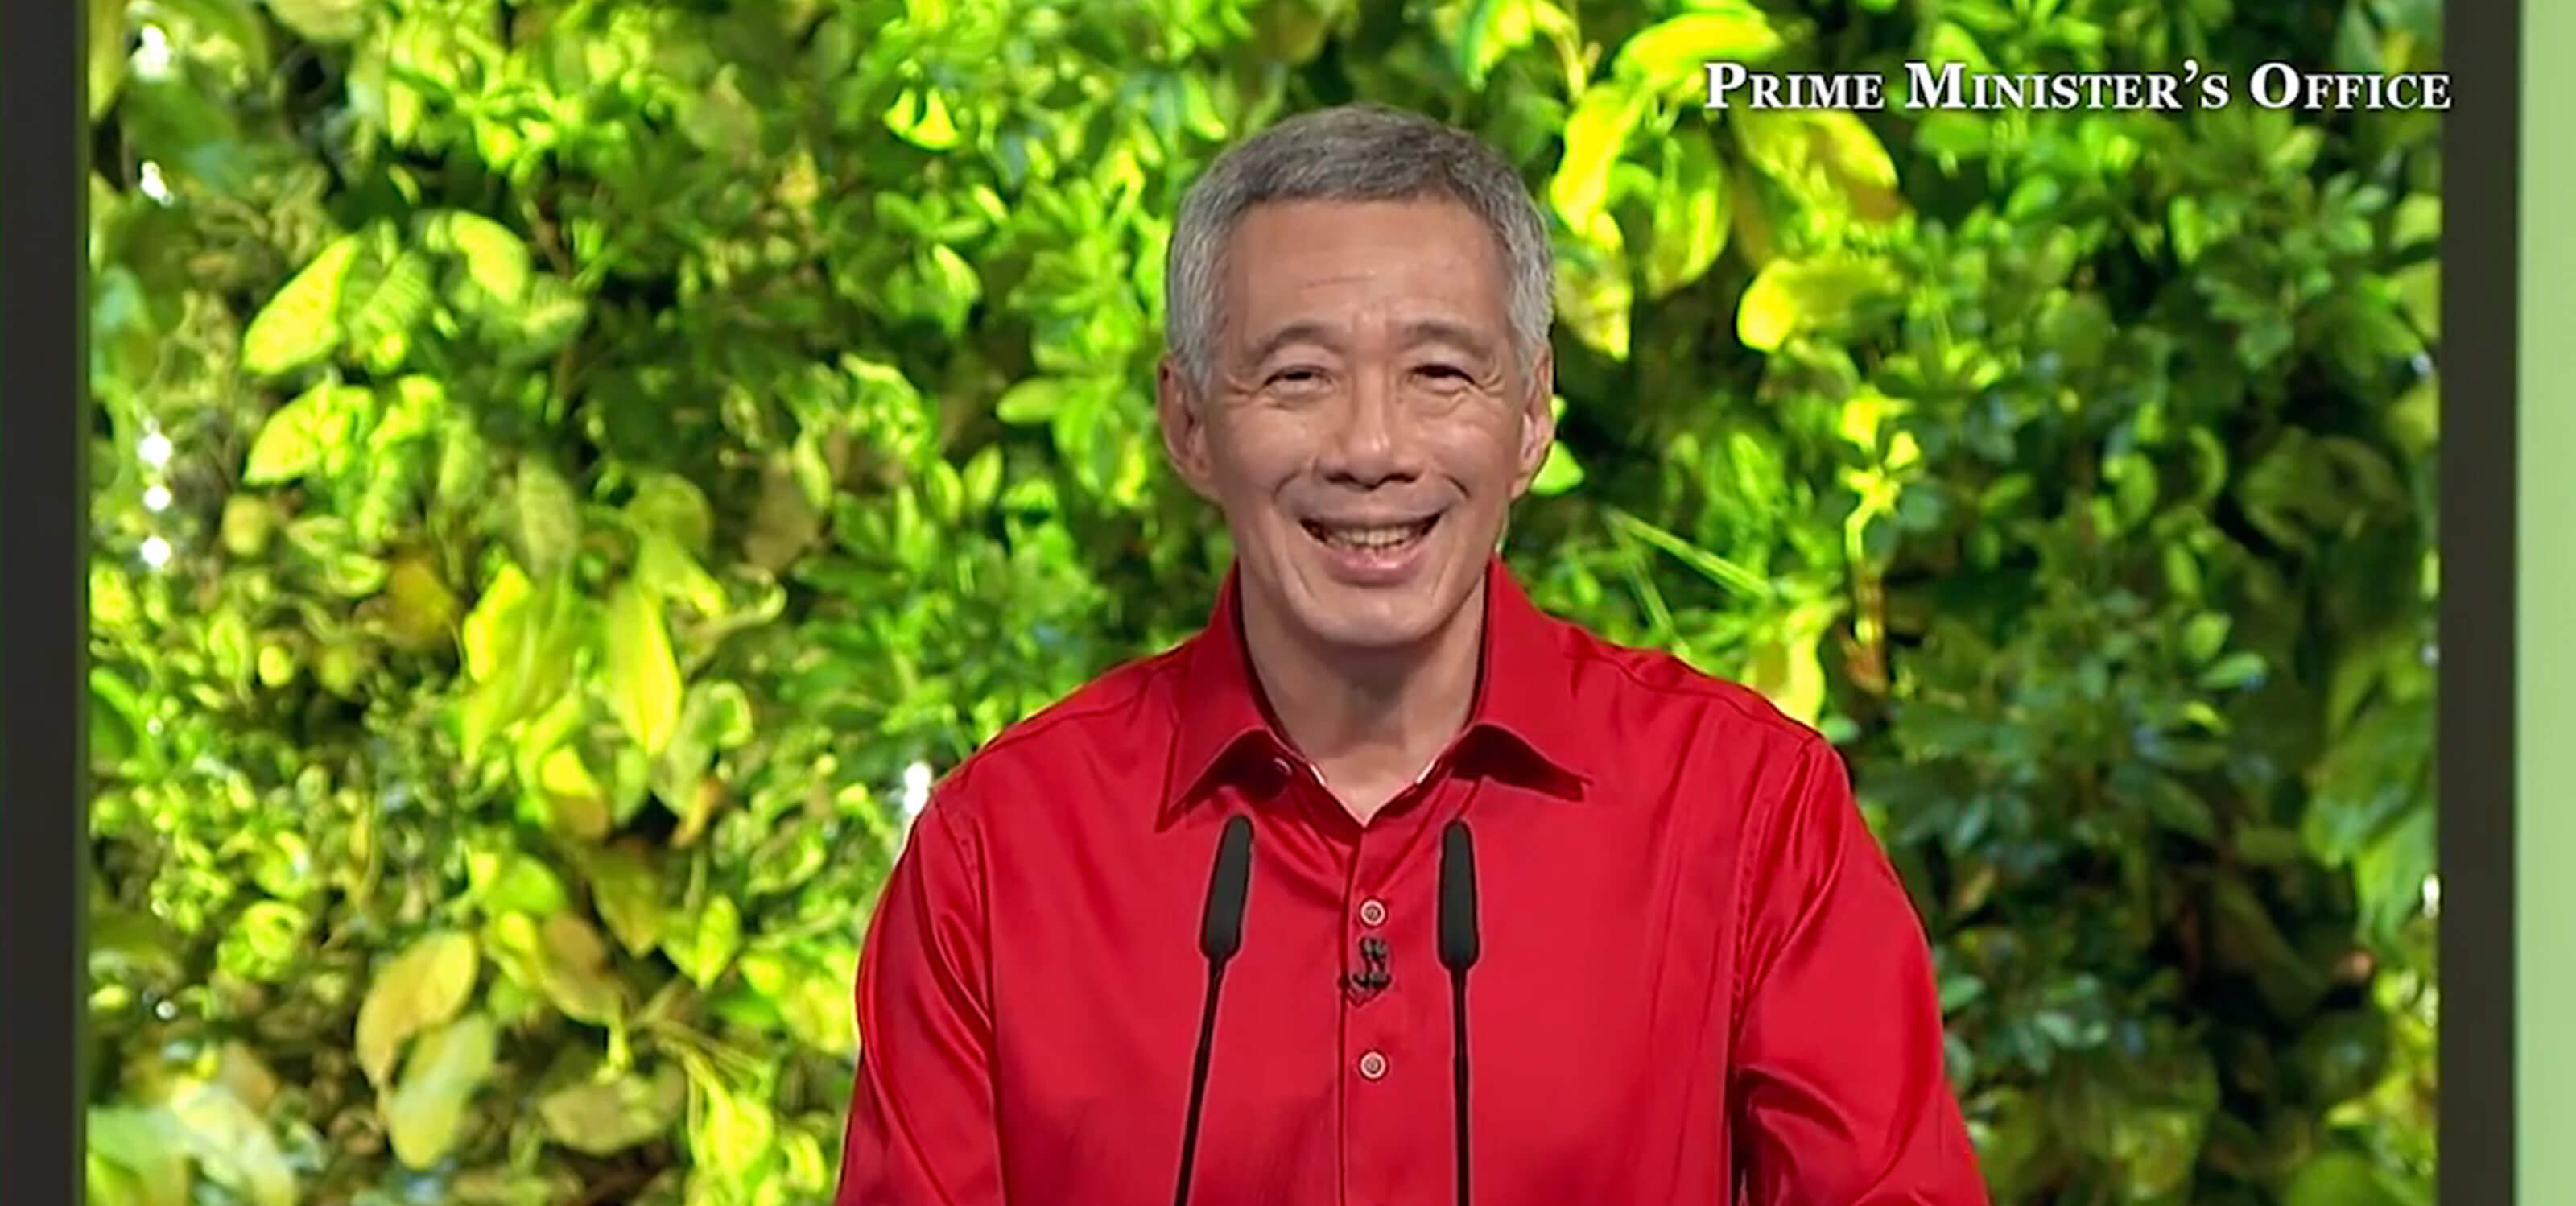 Singapore's Prime Minister, Lee Hsien Loong stands at a lectern with an image of a wall of vines behind him